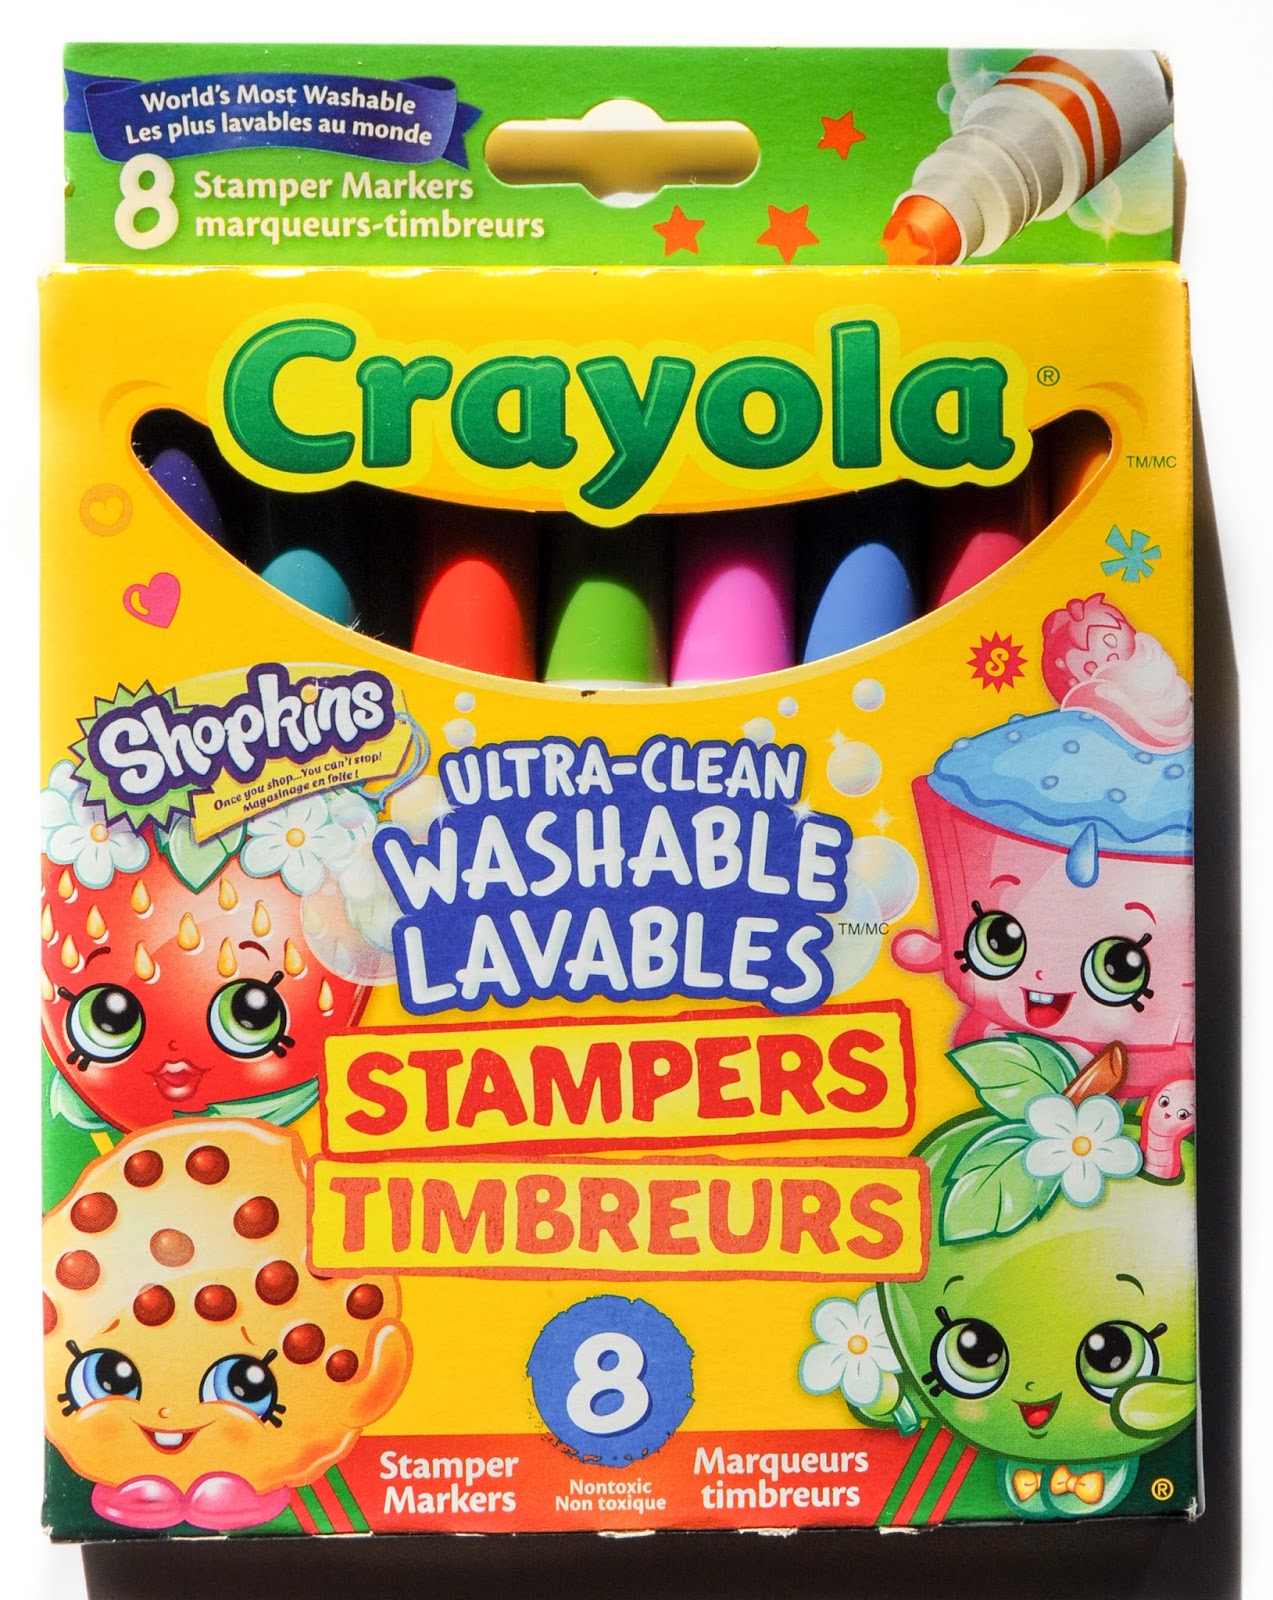 Crayola Stampers Markers: What's Inside the Box and History | Jenny's ...